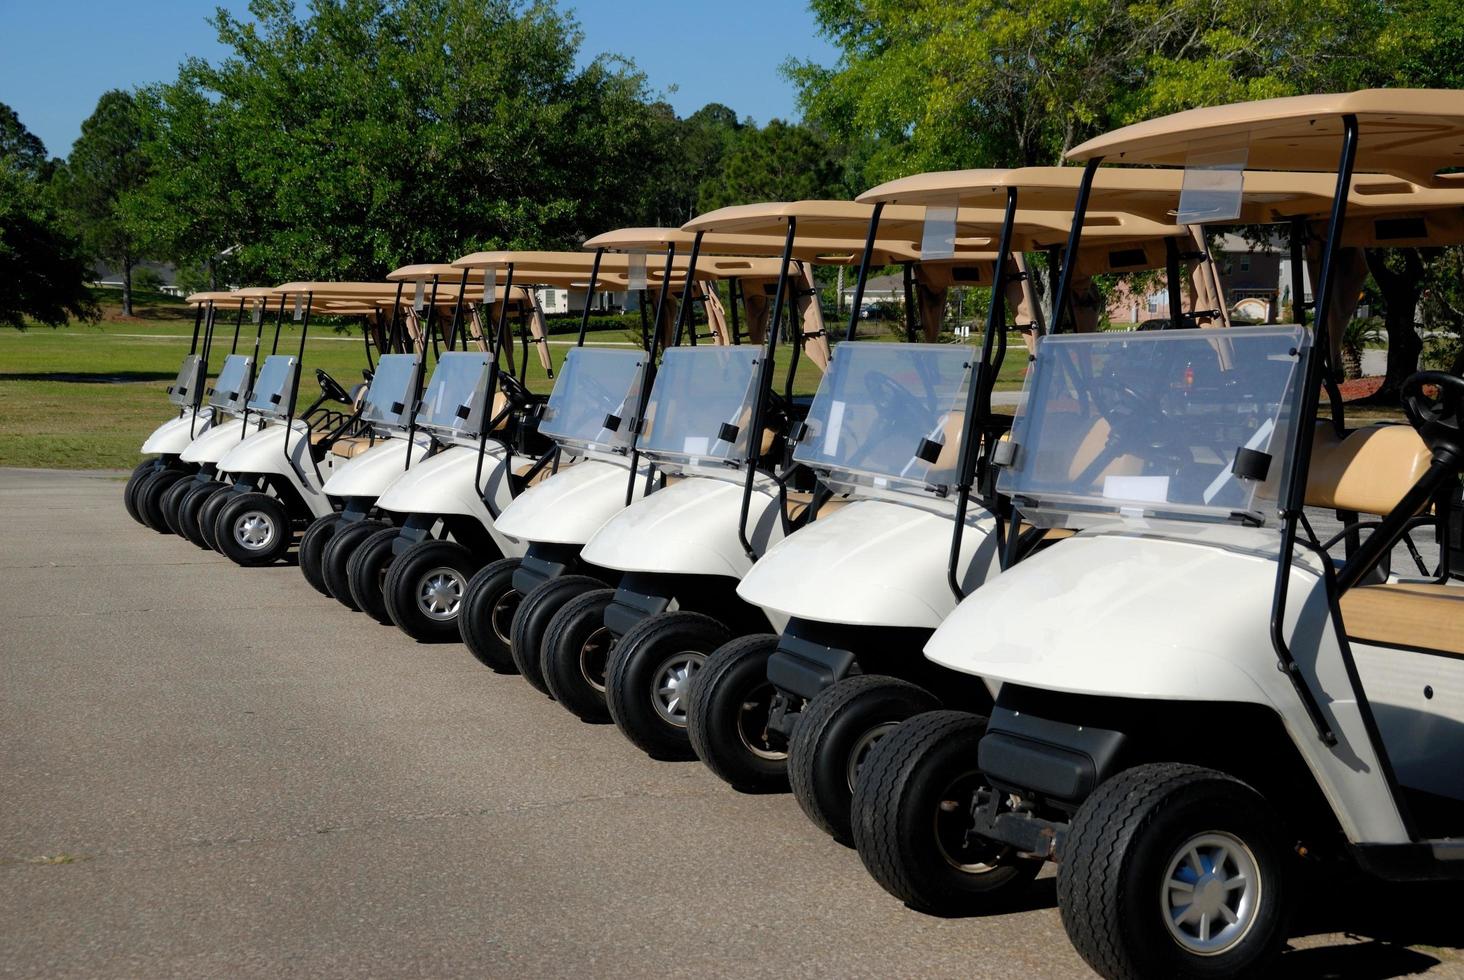 Golf carts at the golf course photo